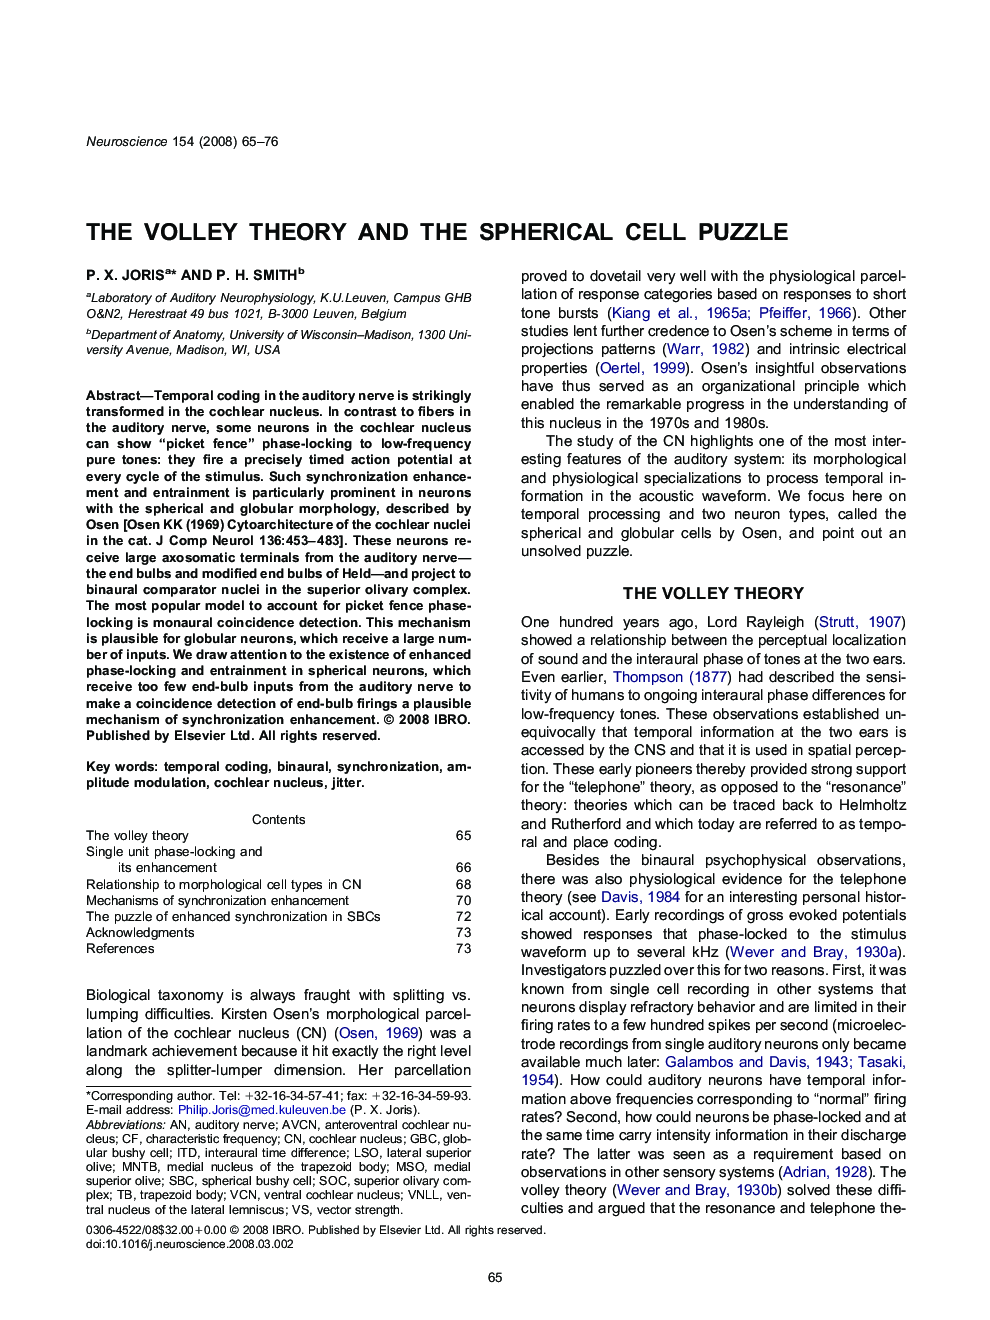 The volley theory and the spherical cell puzzle